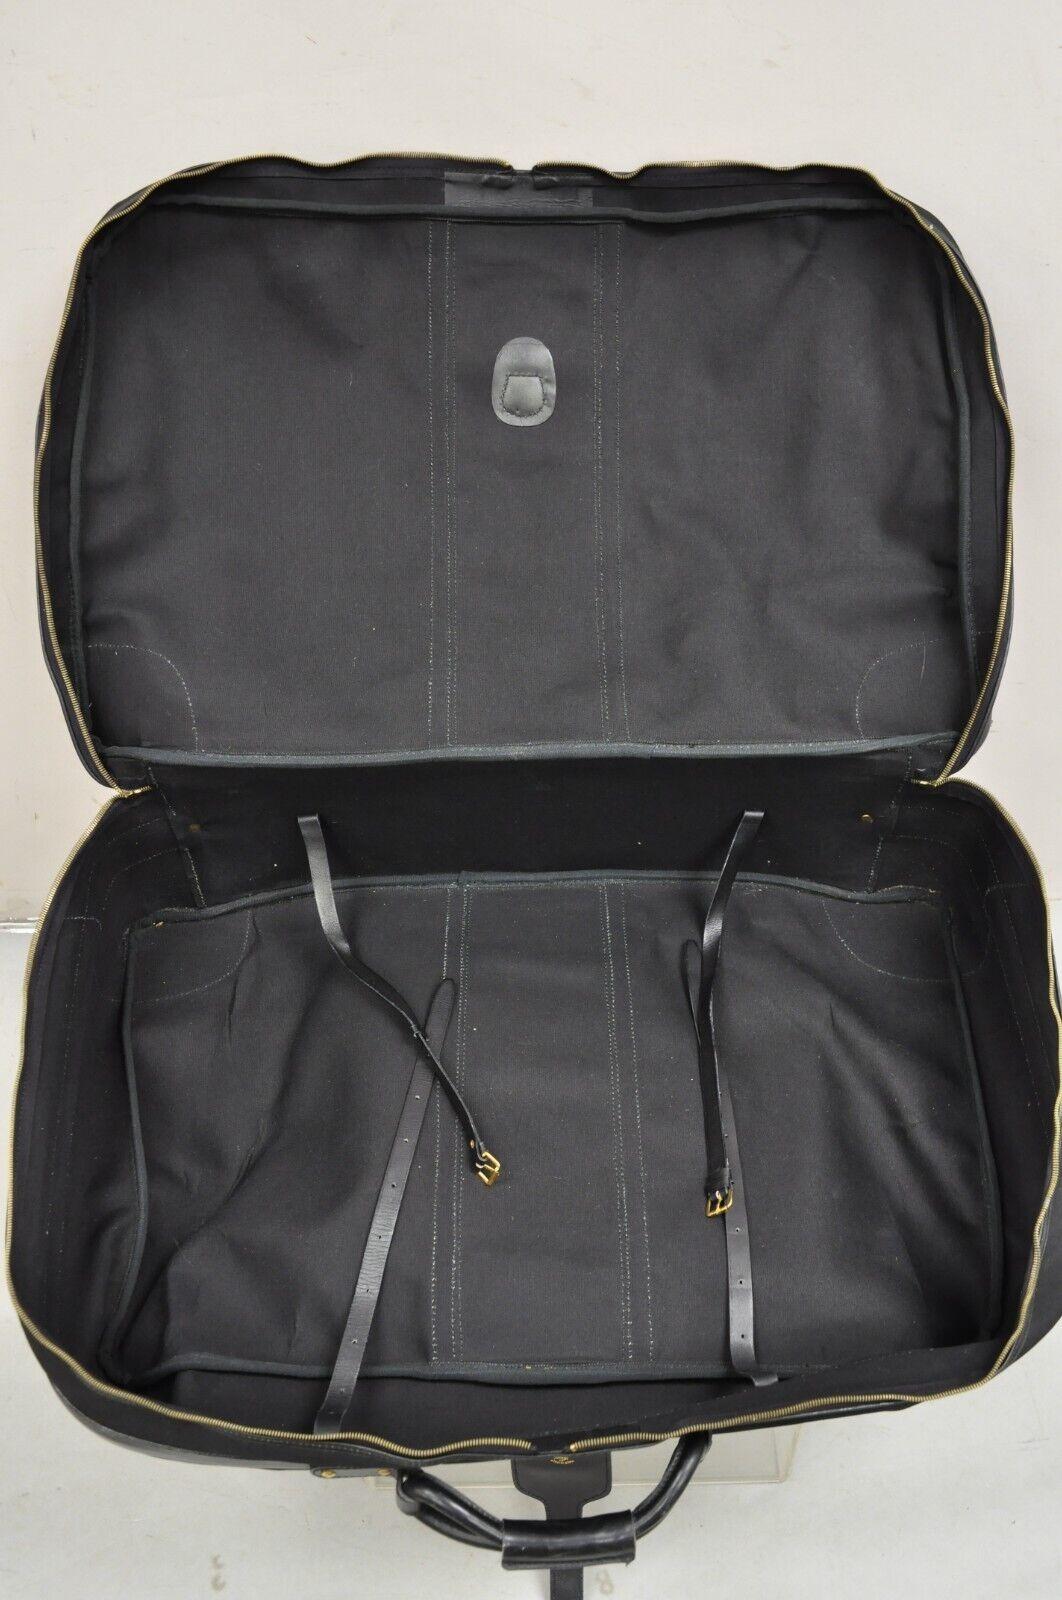 Vintage Gucci Black Canvas & Leather Suitcase Luggage His and Hers Set -2 Pc (B) For Sale 2